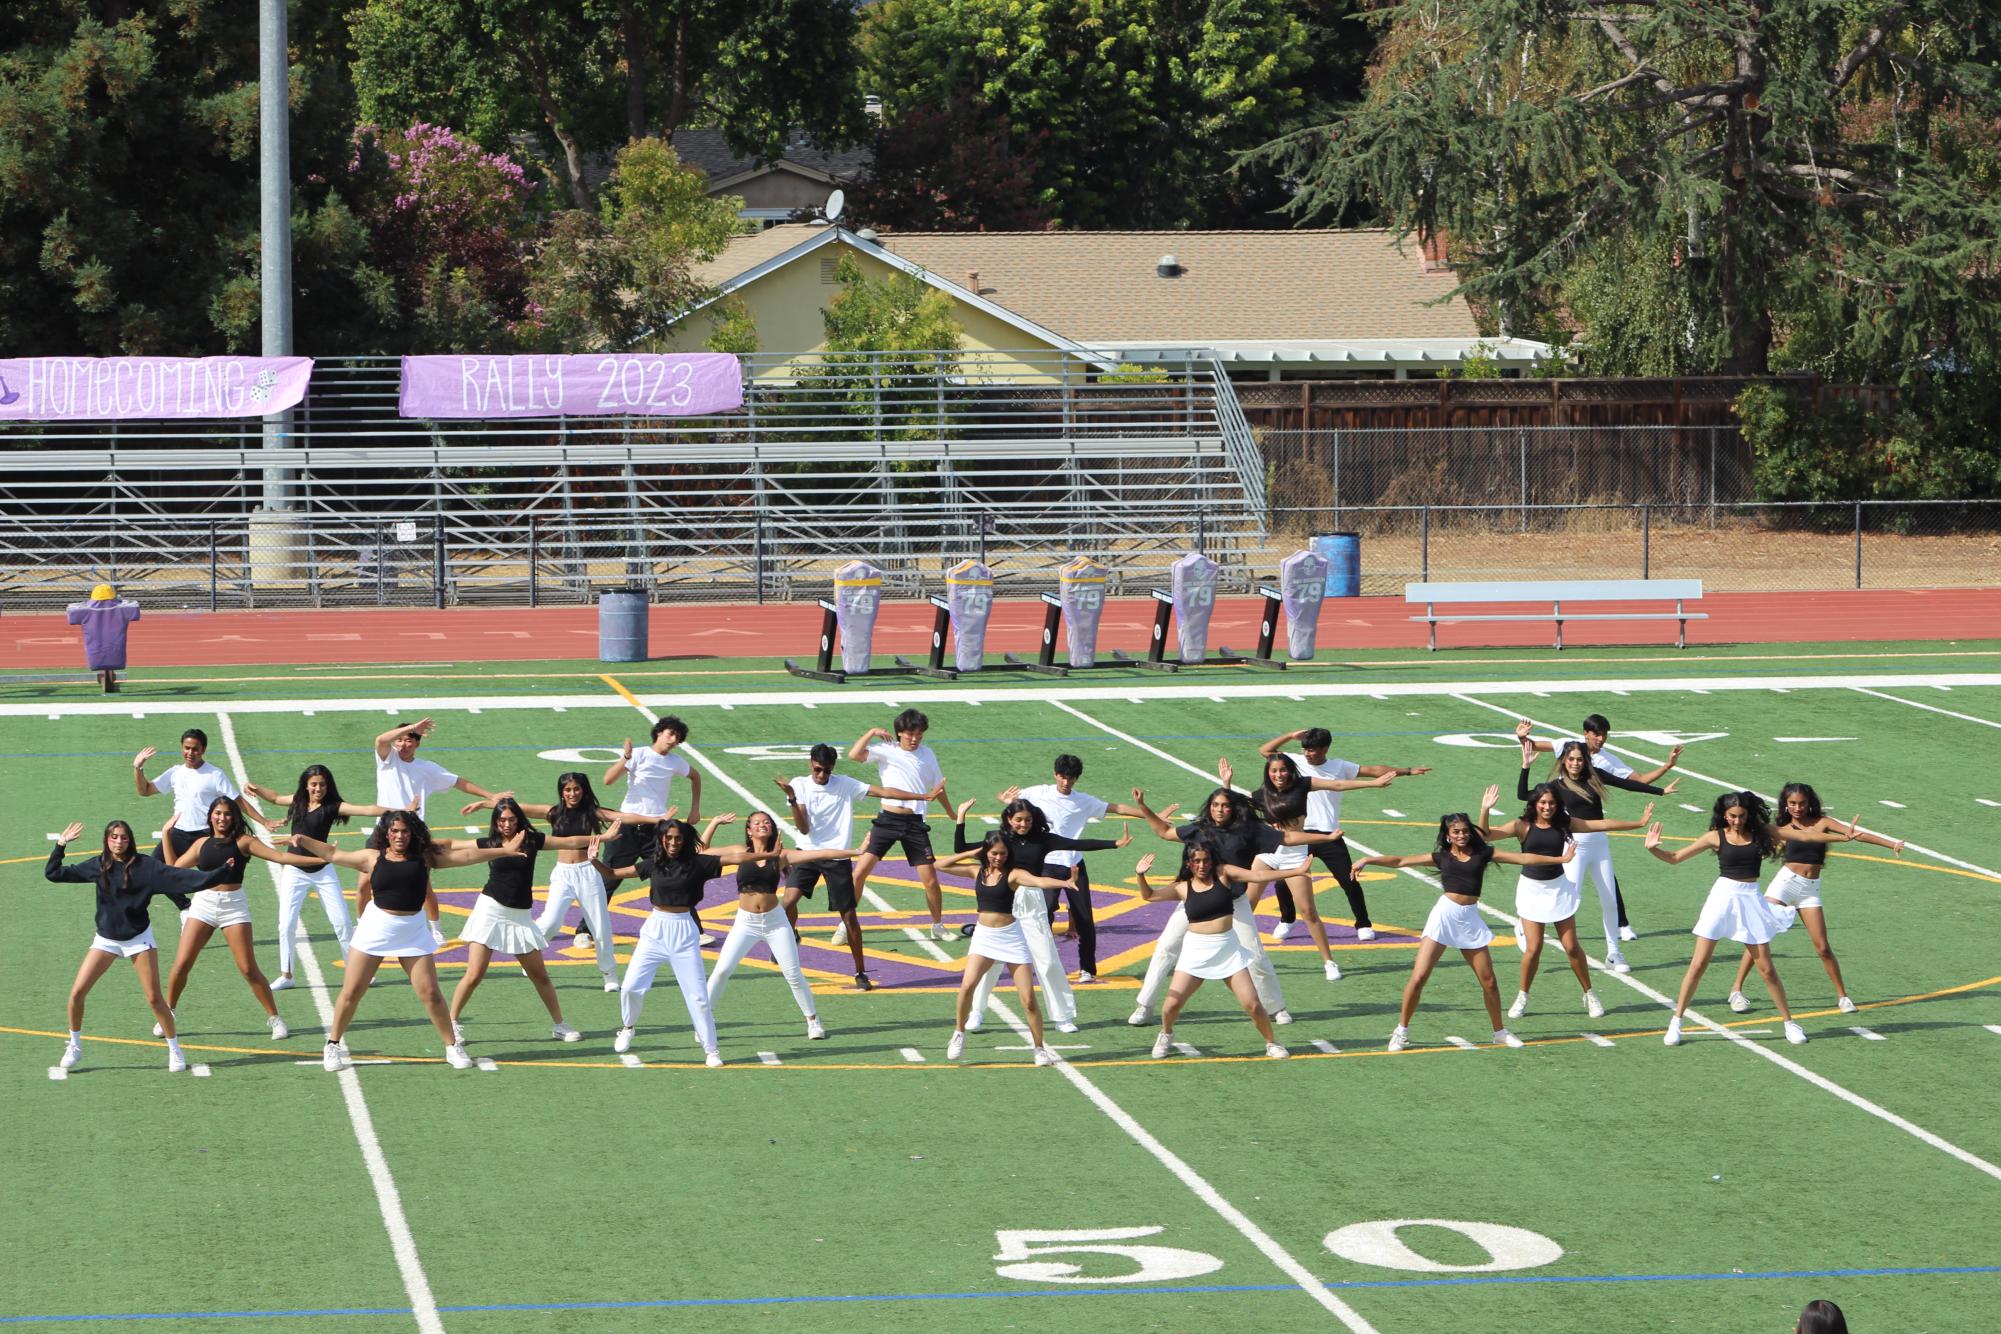 Amador+hosts+annual+Homecoming+Rally+in+spectacular+fashion